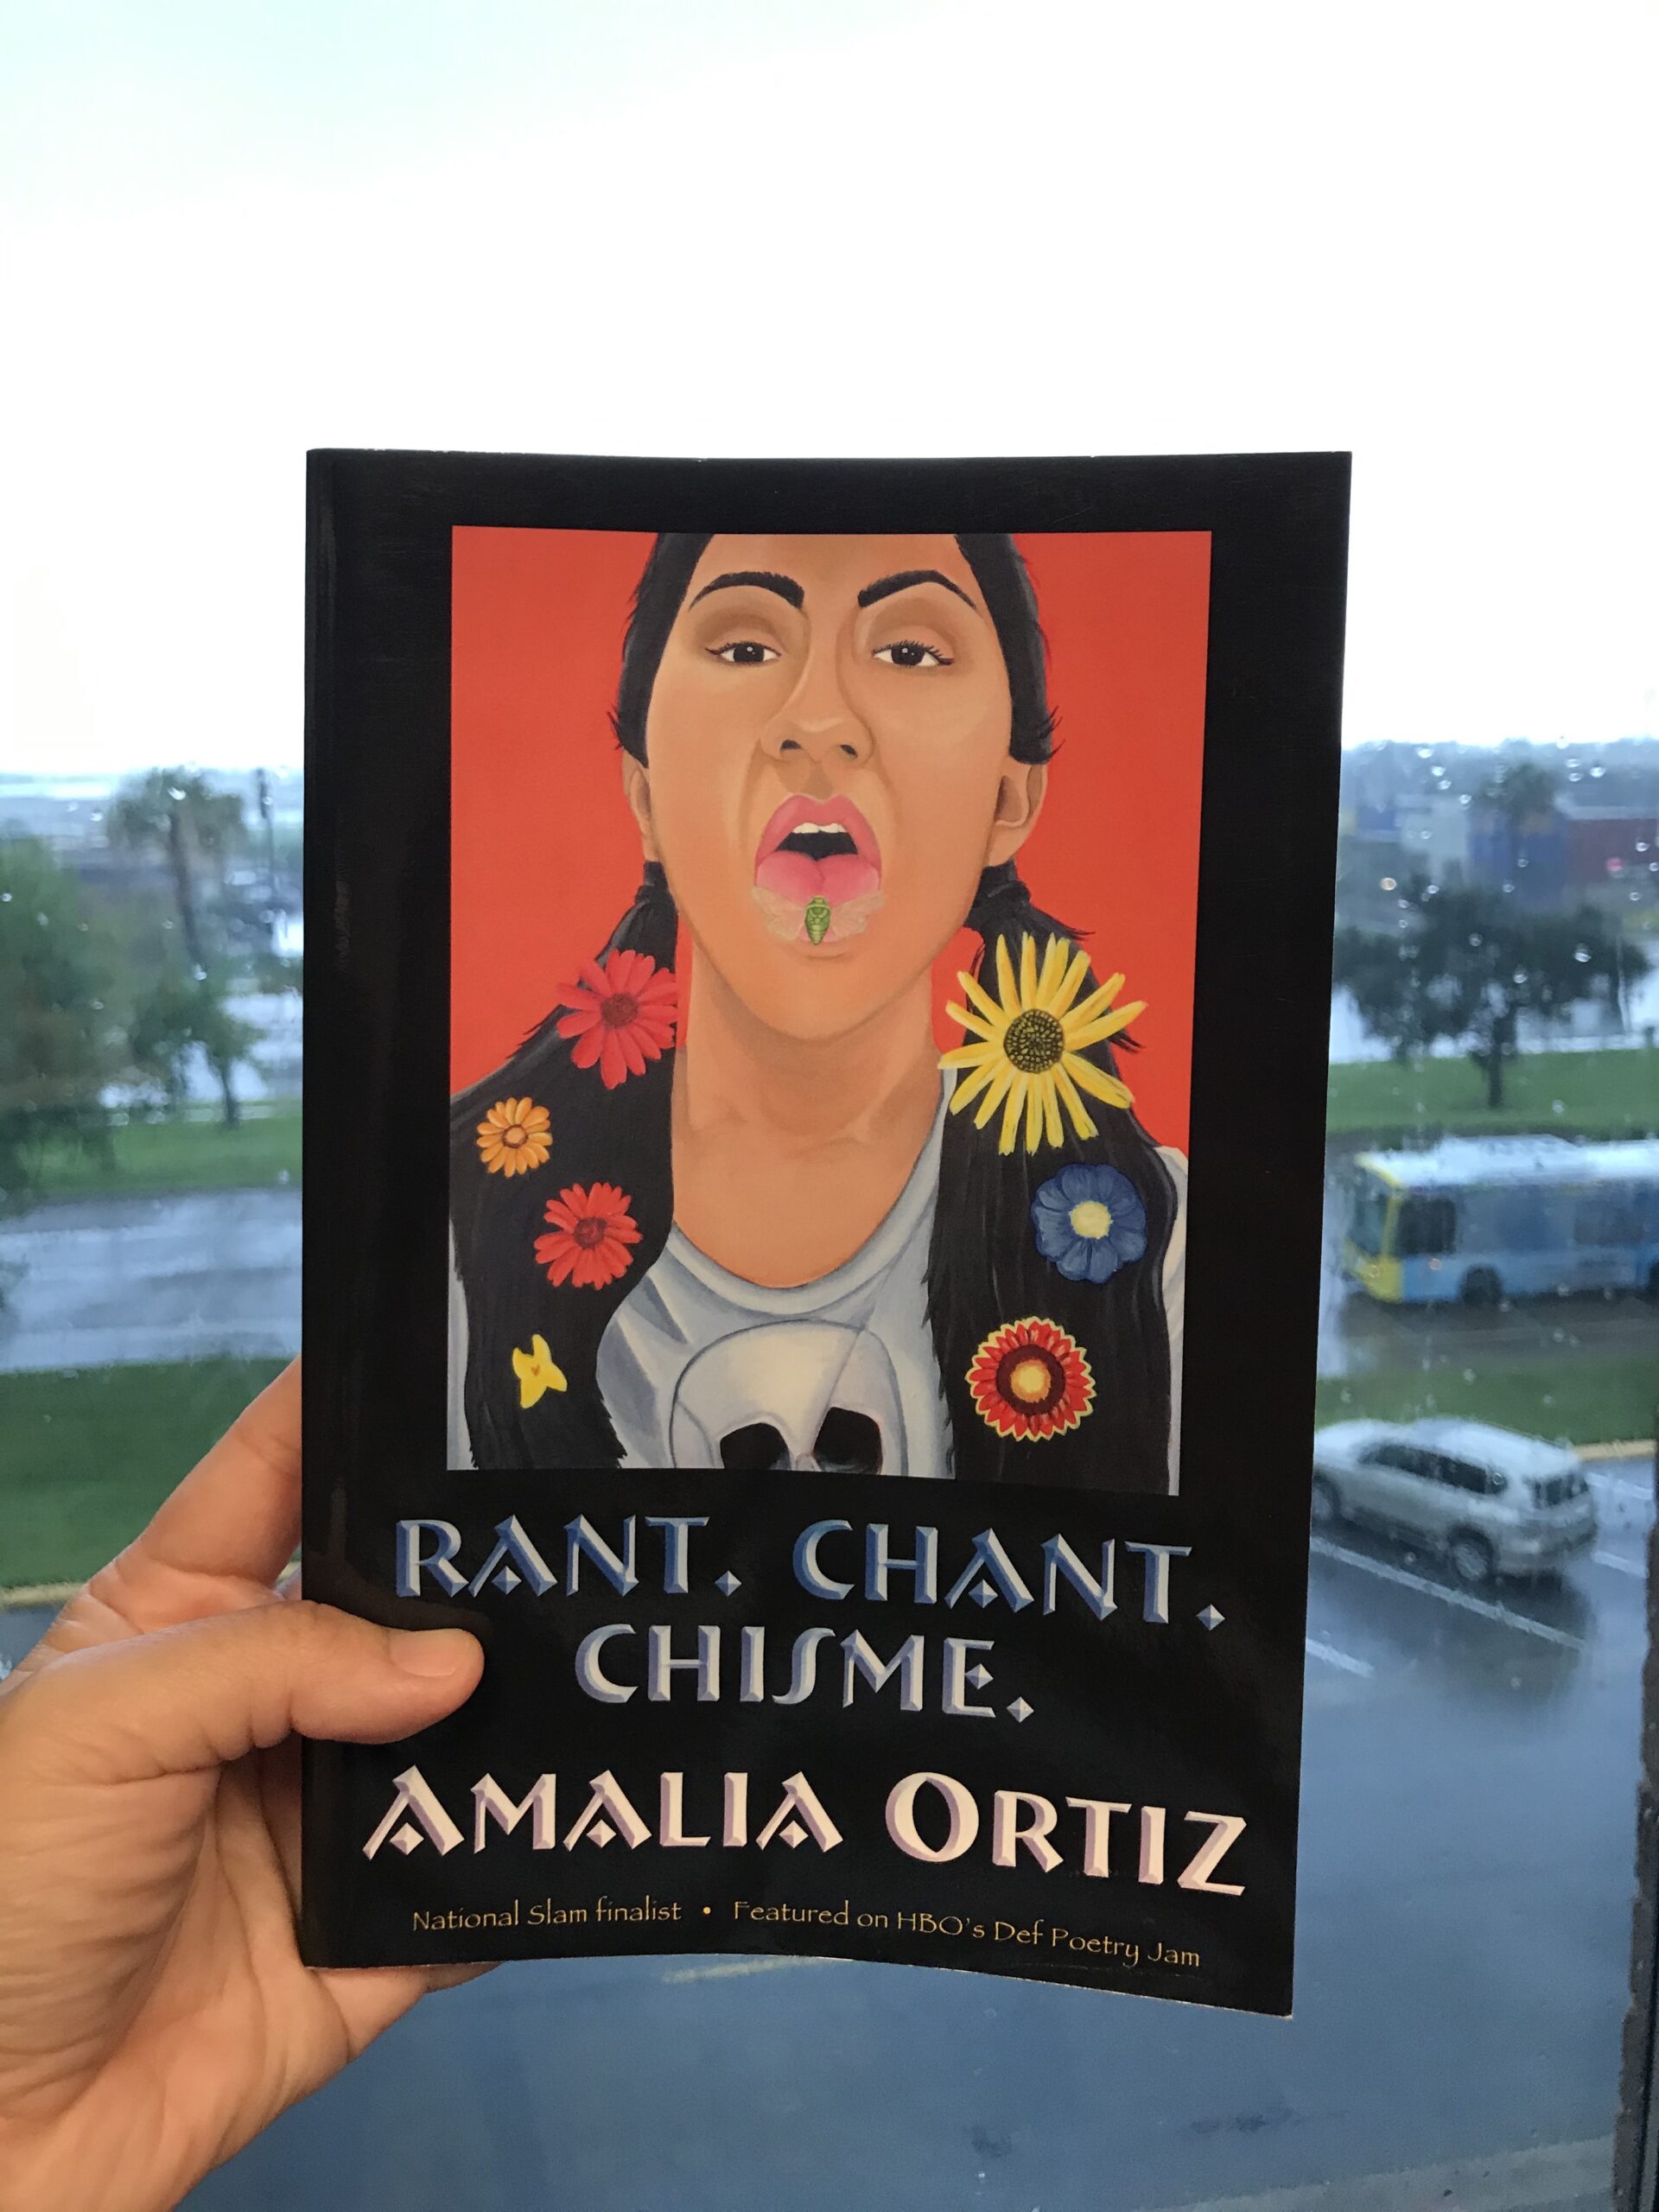 A hand holds up a copy of Amalia Ortiz's book, Rant. Chant. Chisme. The cover depicts a woman sticking her tongue out to reveal a cicada. Her dark hair is parted and features different brightly colored flowers. Source: Marlene Galván